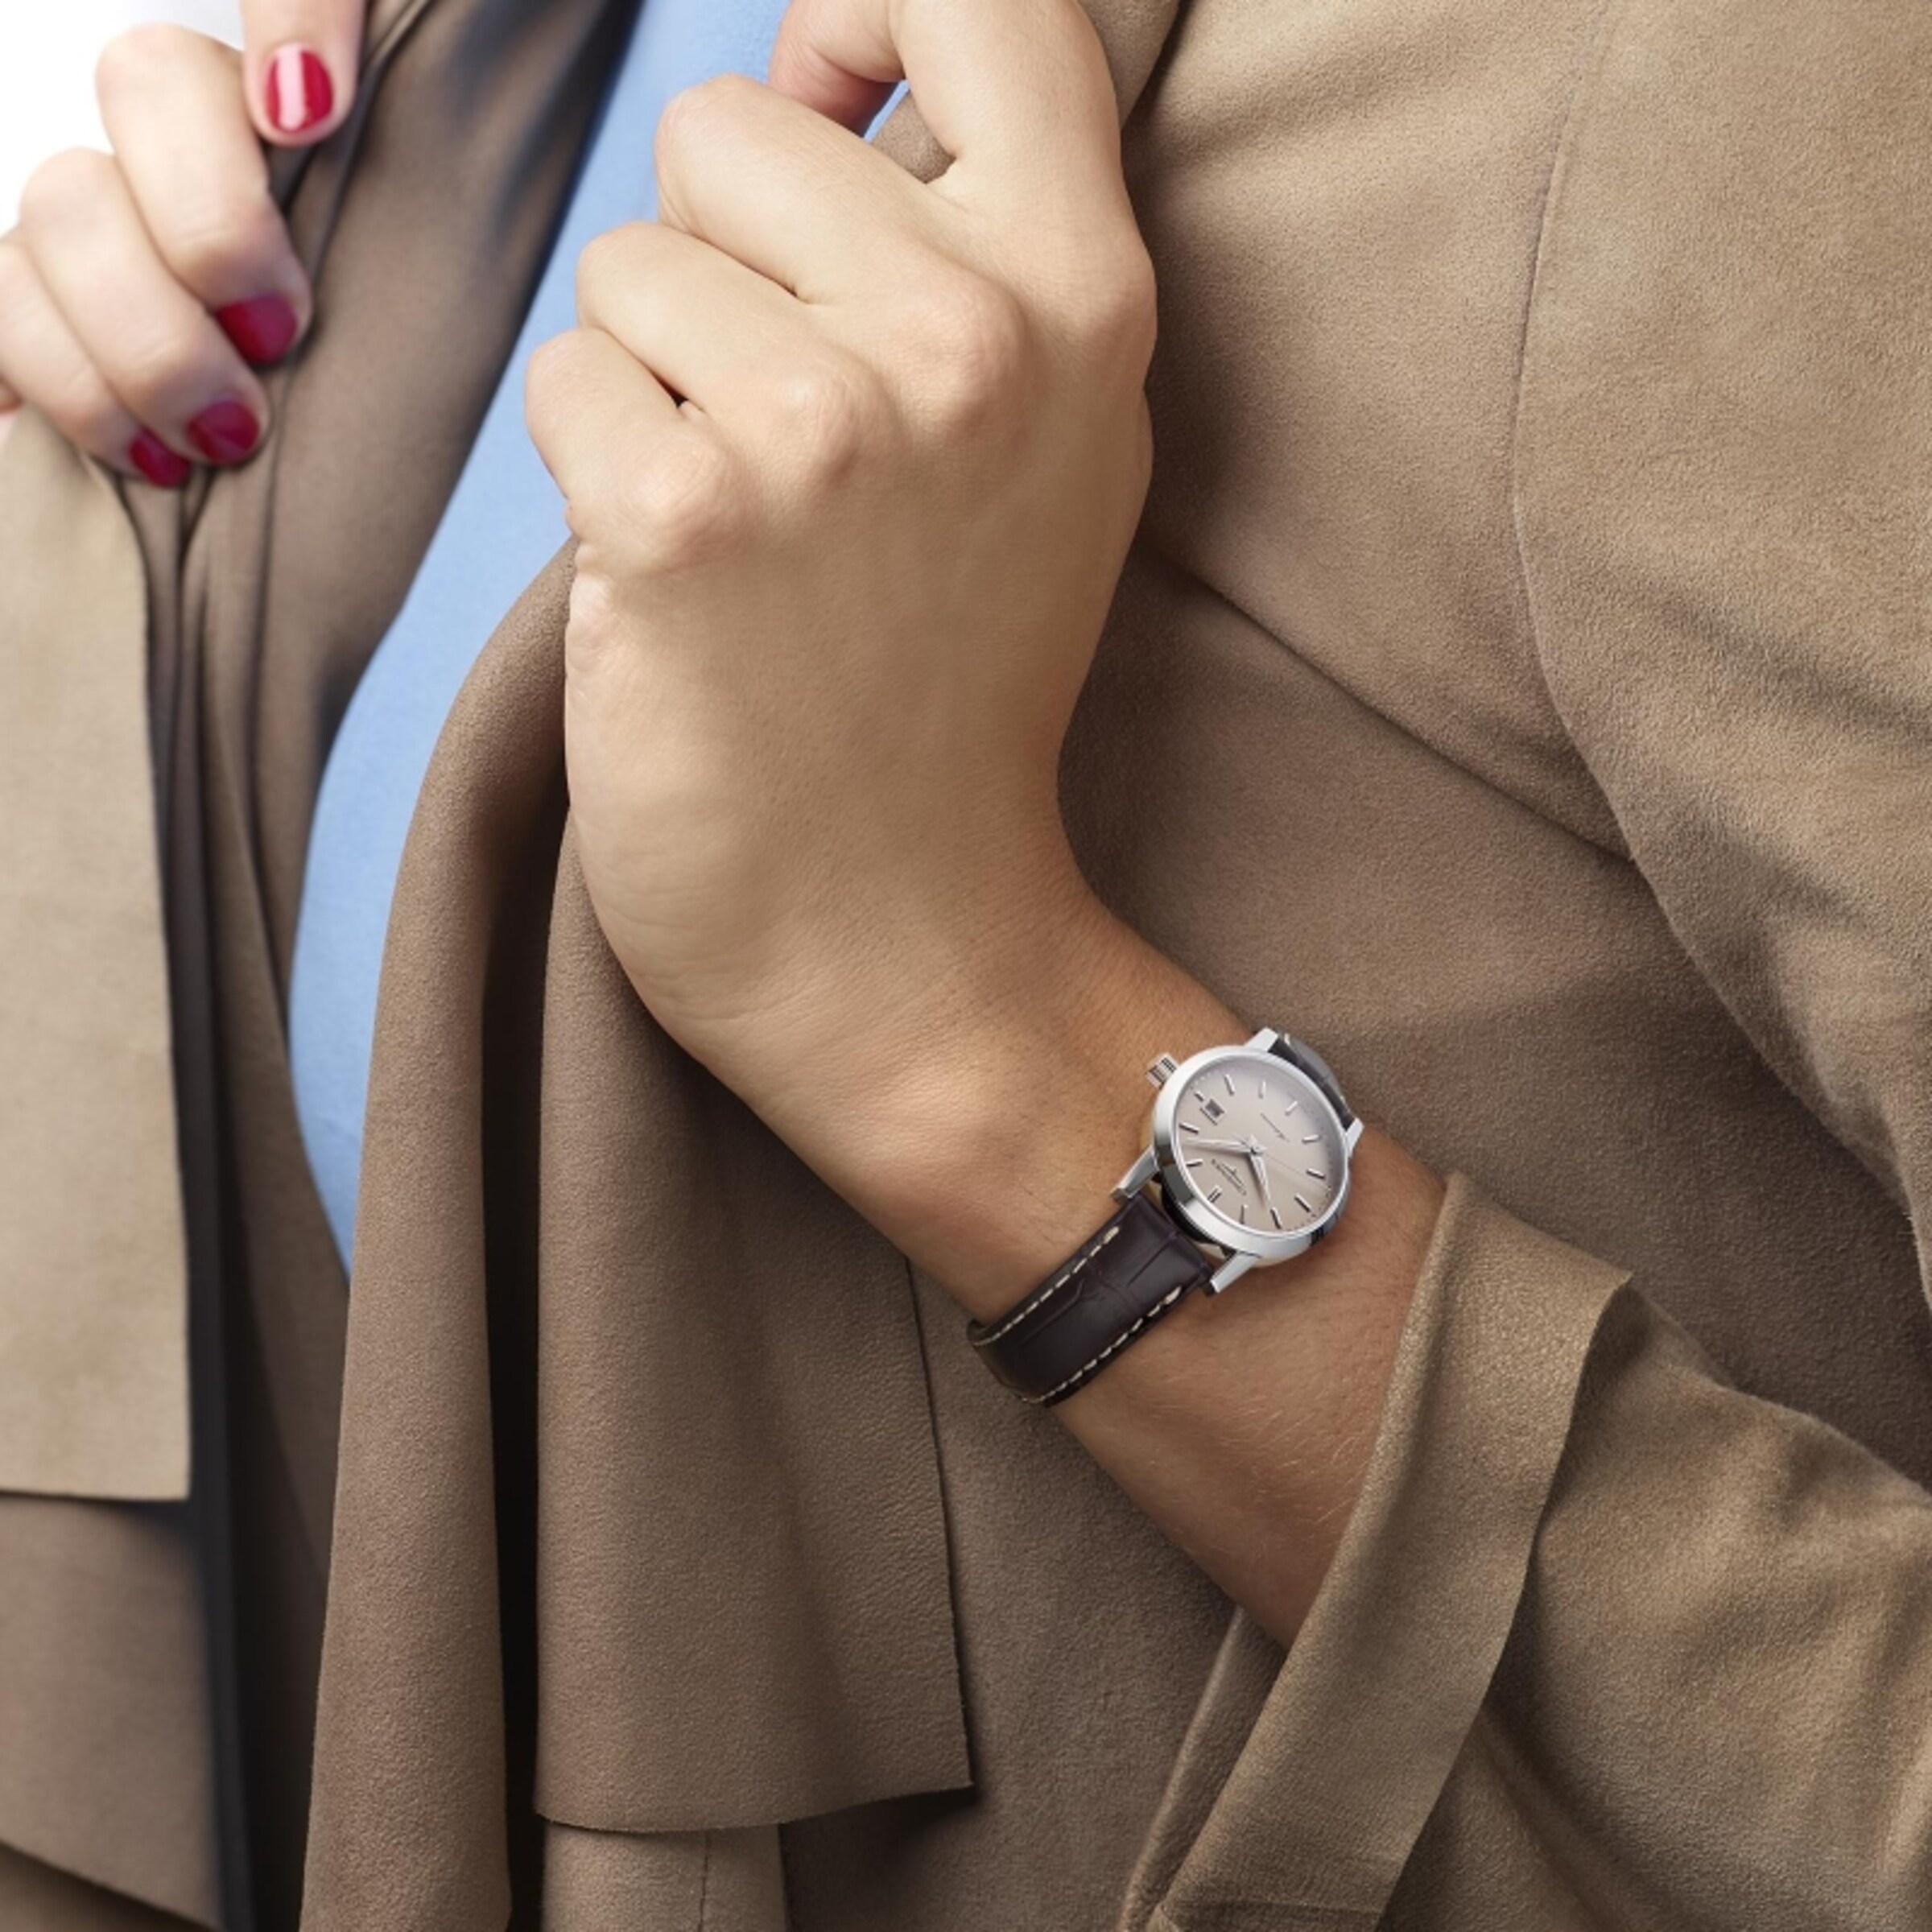 A woman is wearing the Longines 1832 watch